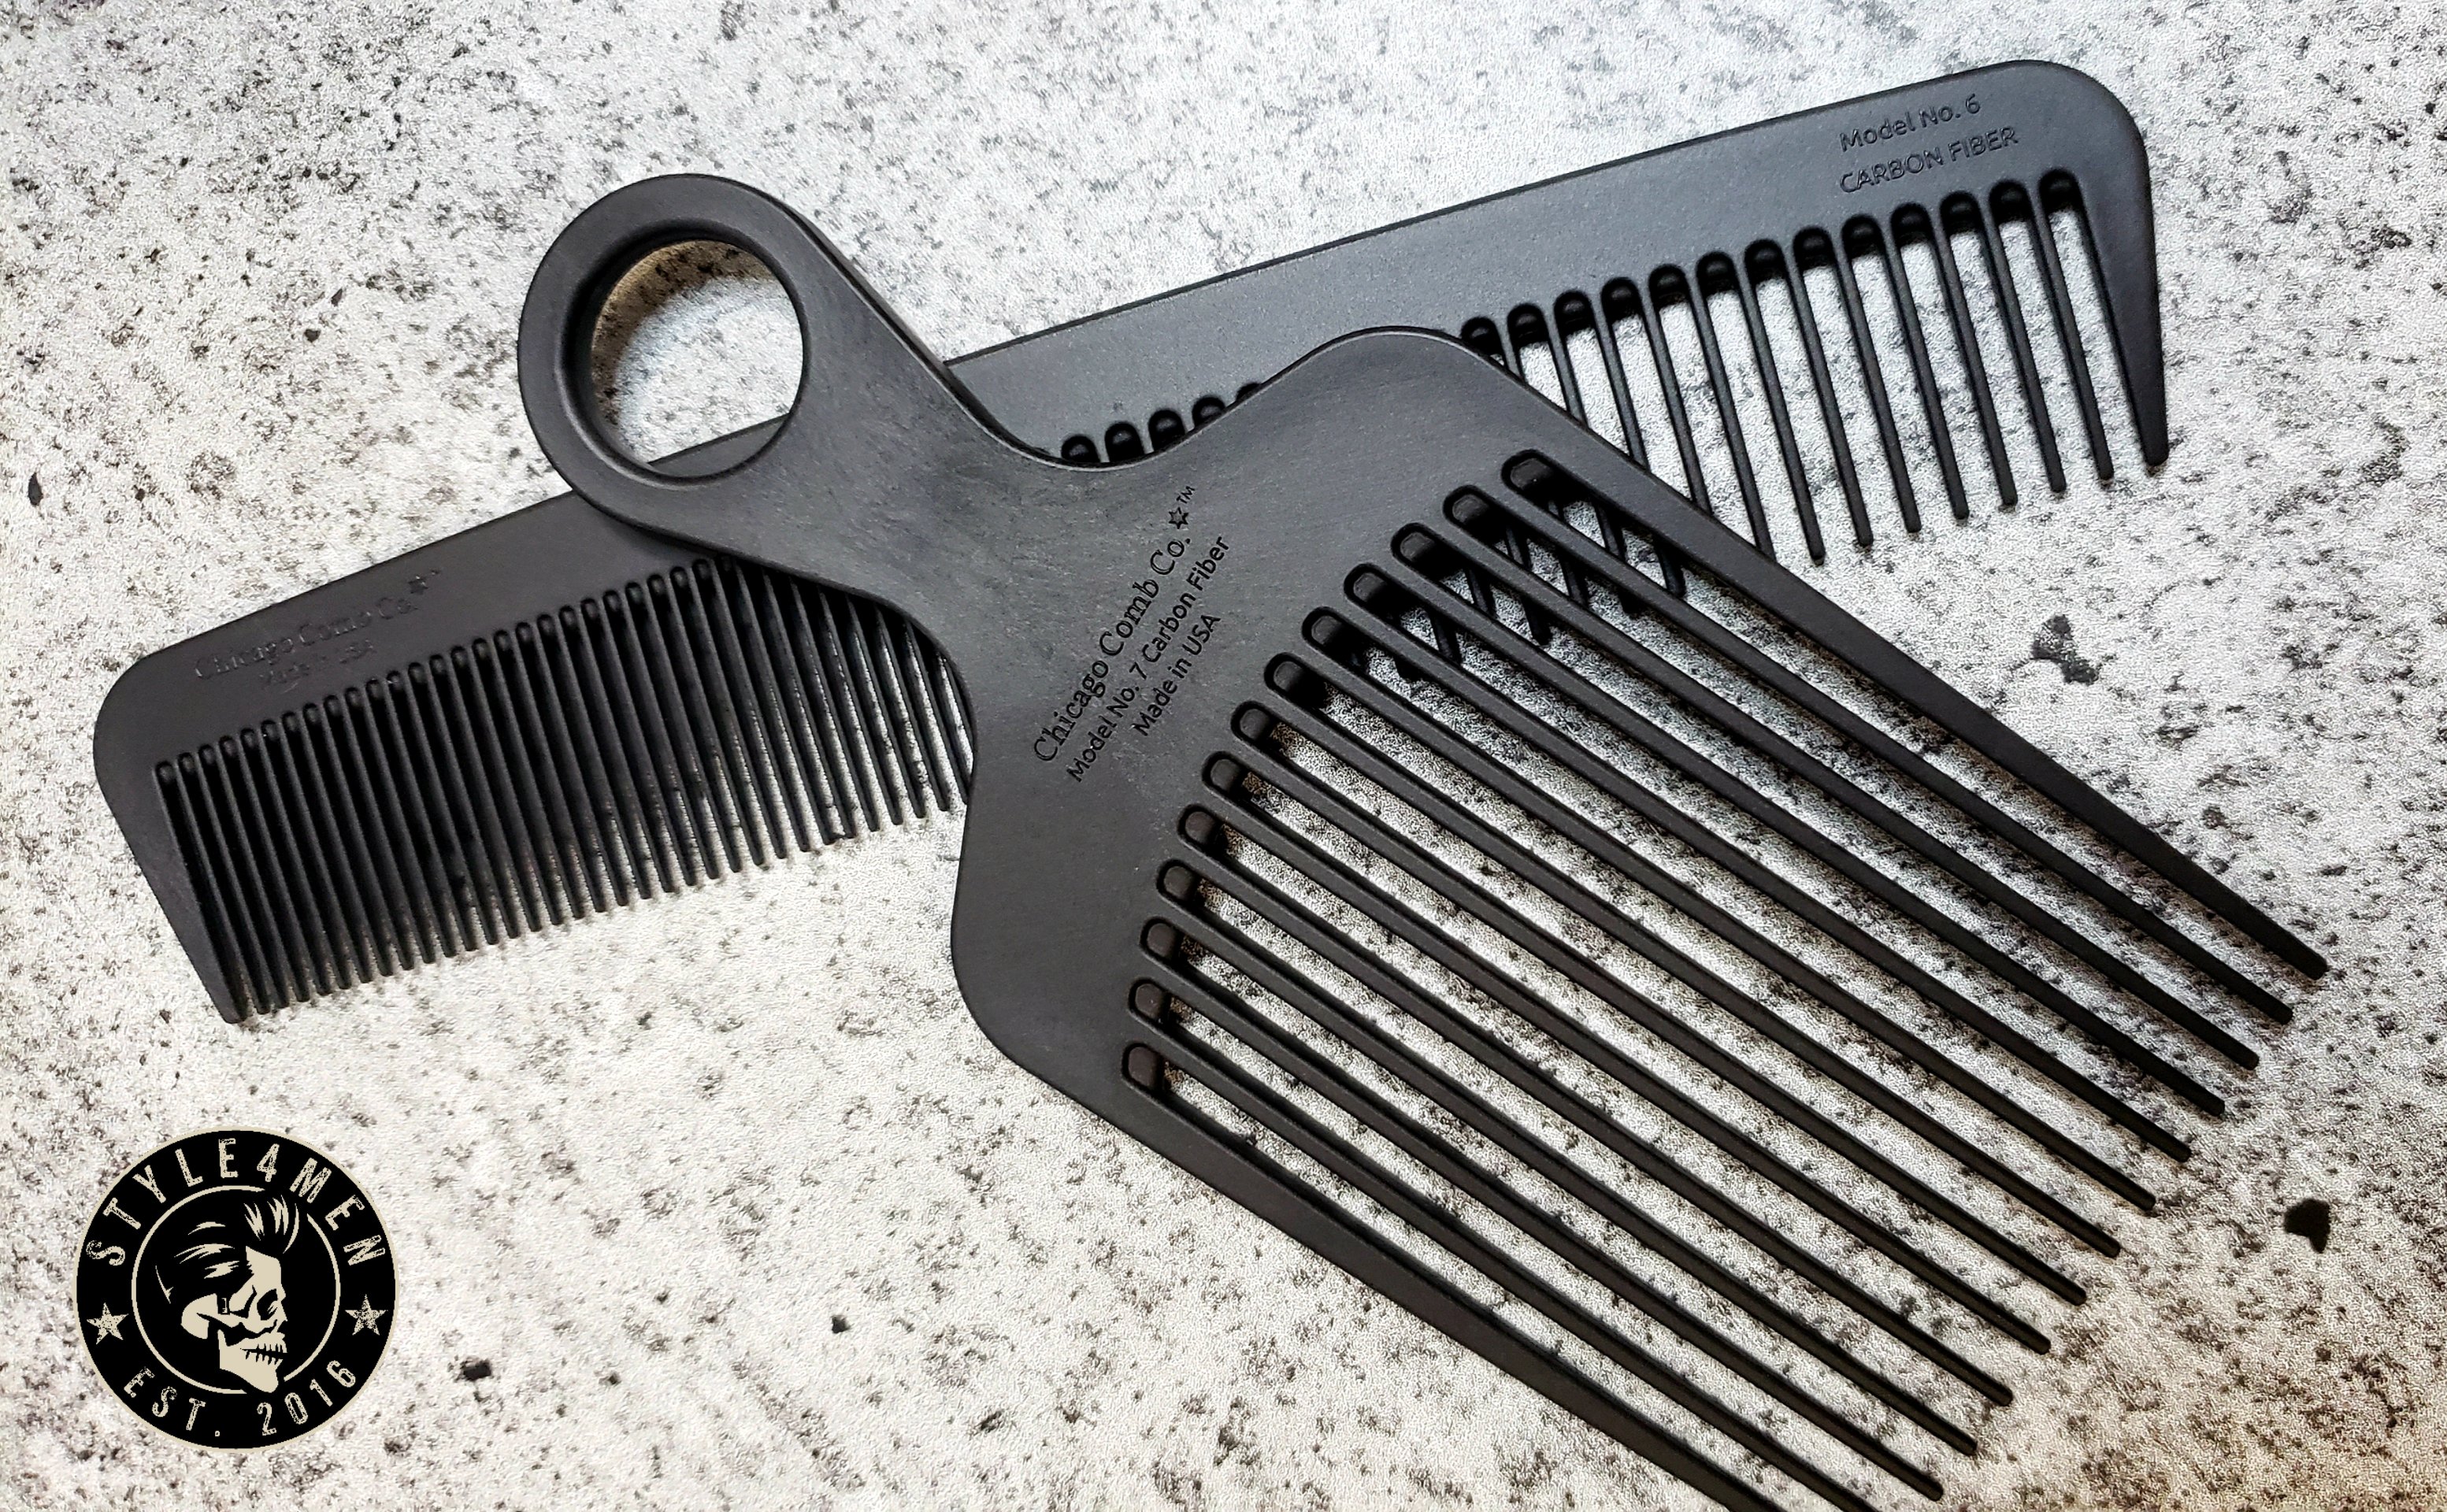 Chicago Comb Co – The comb you didn’t know you needed